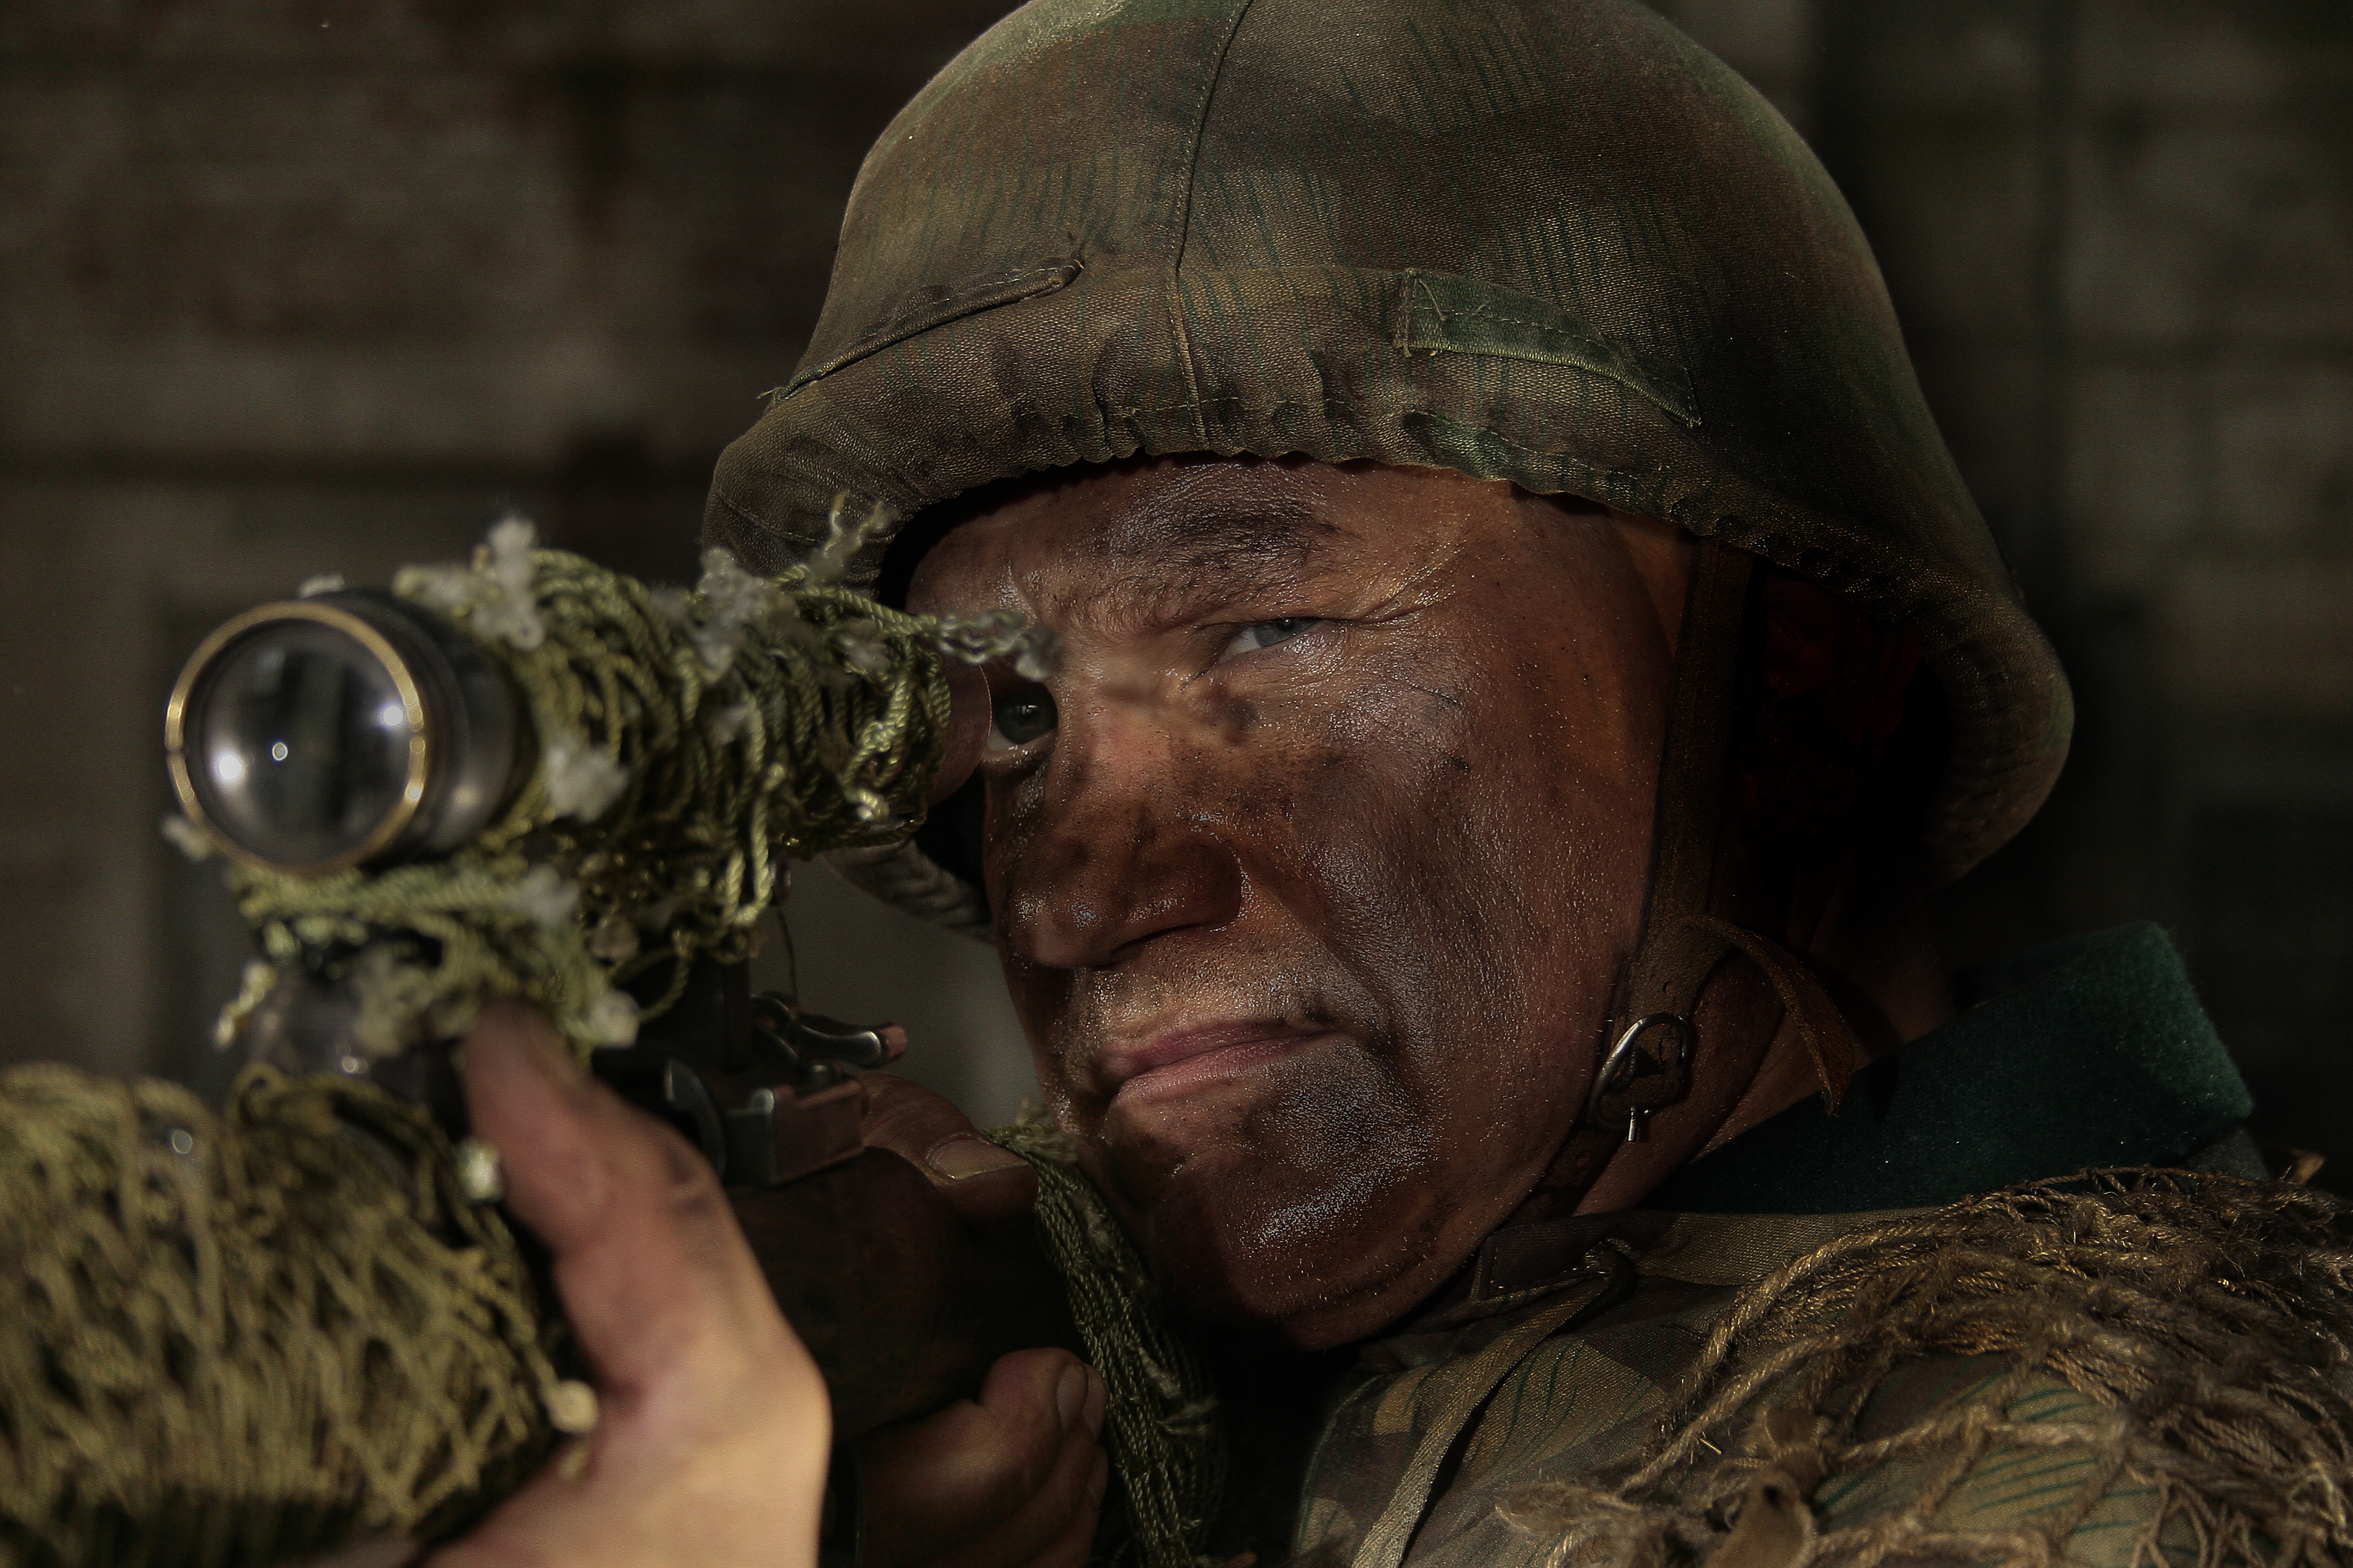 Still from the film Sniper: Weapons of retaliation